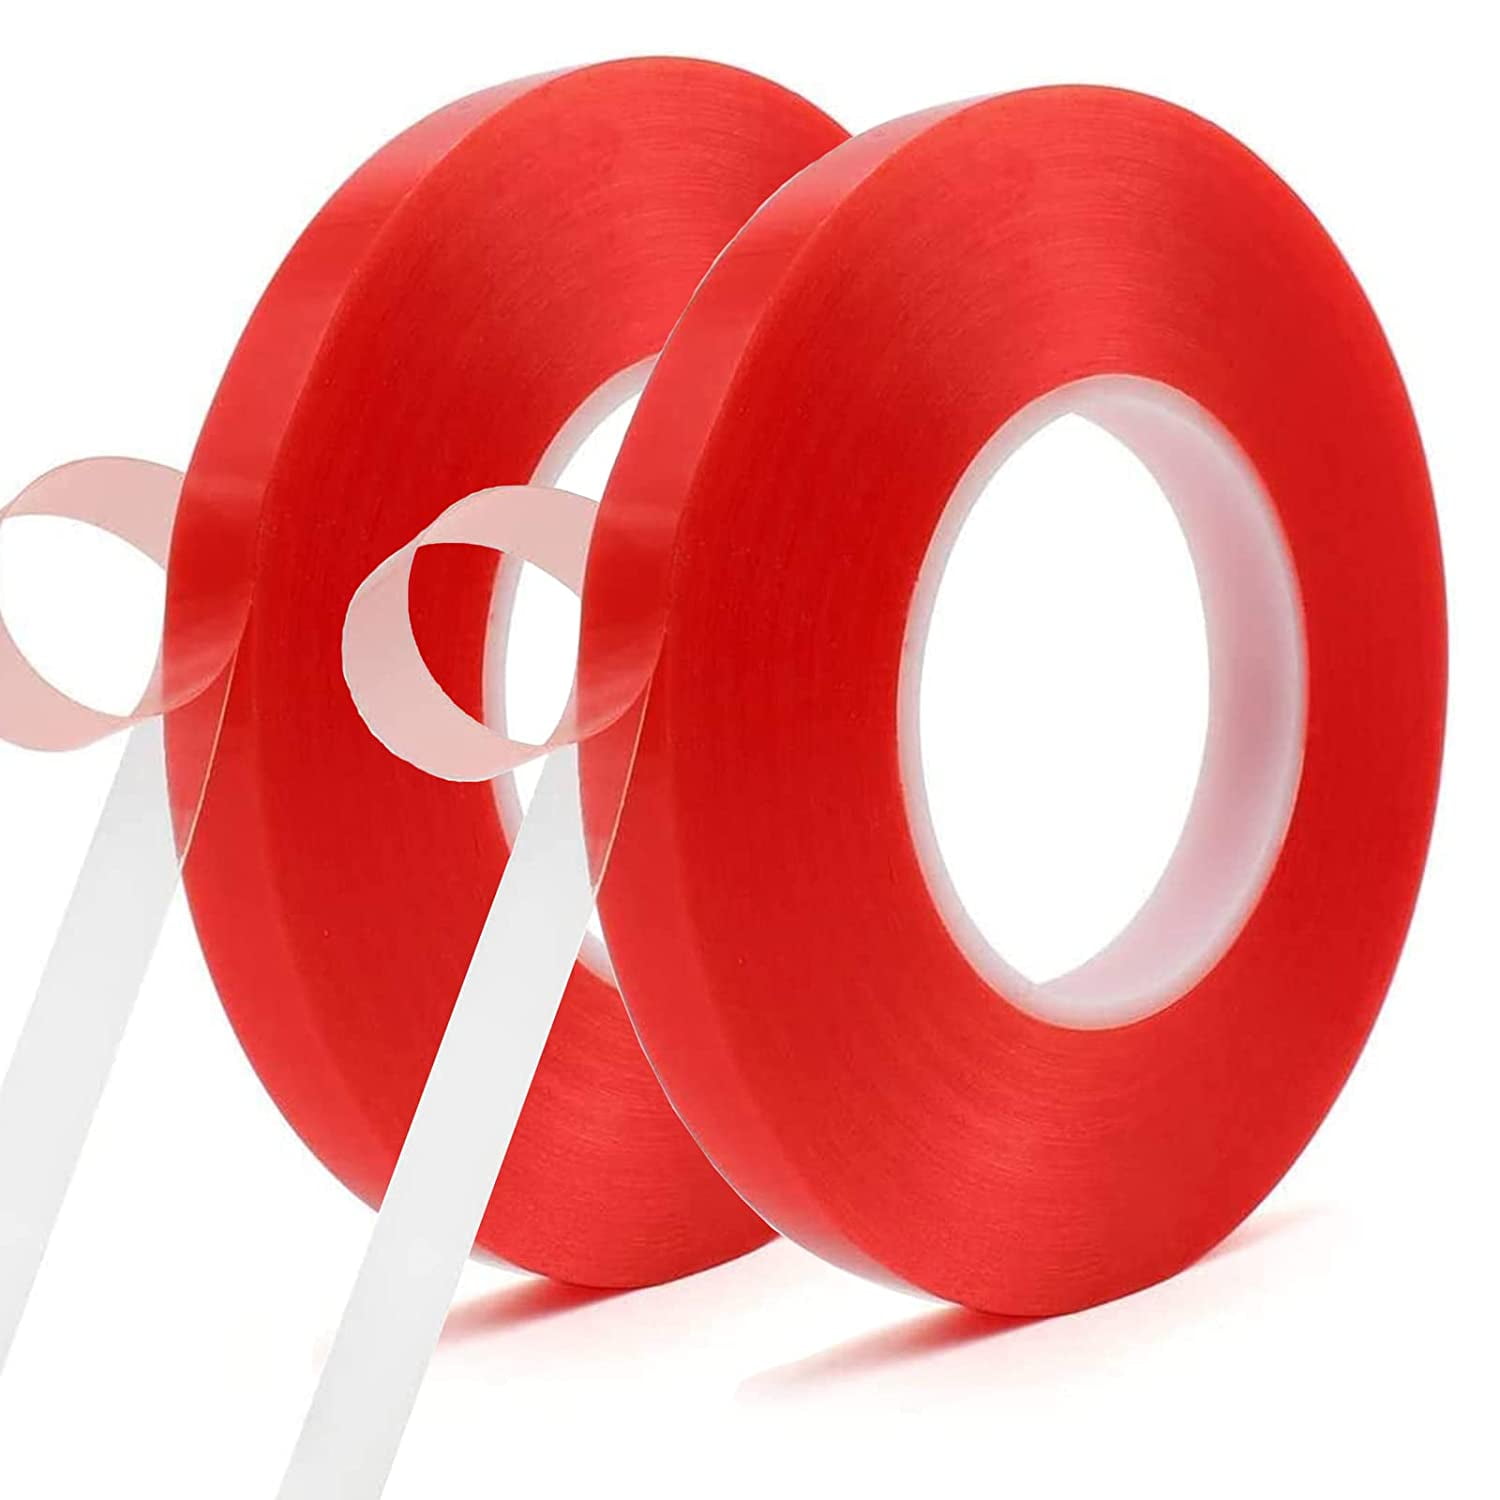 LLPT Double Sided Tape Clear Acrylic Strong Mounting Tape 1 inch x 550 inch Free